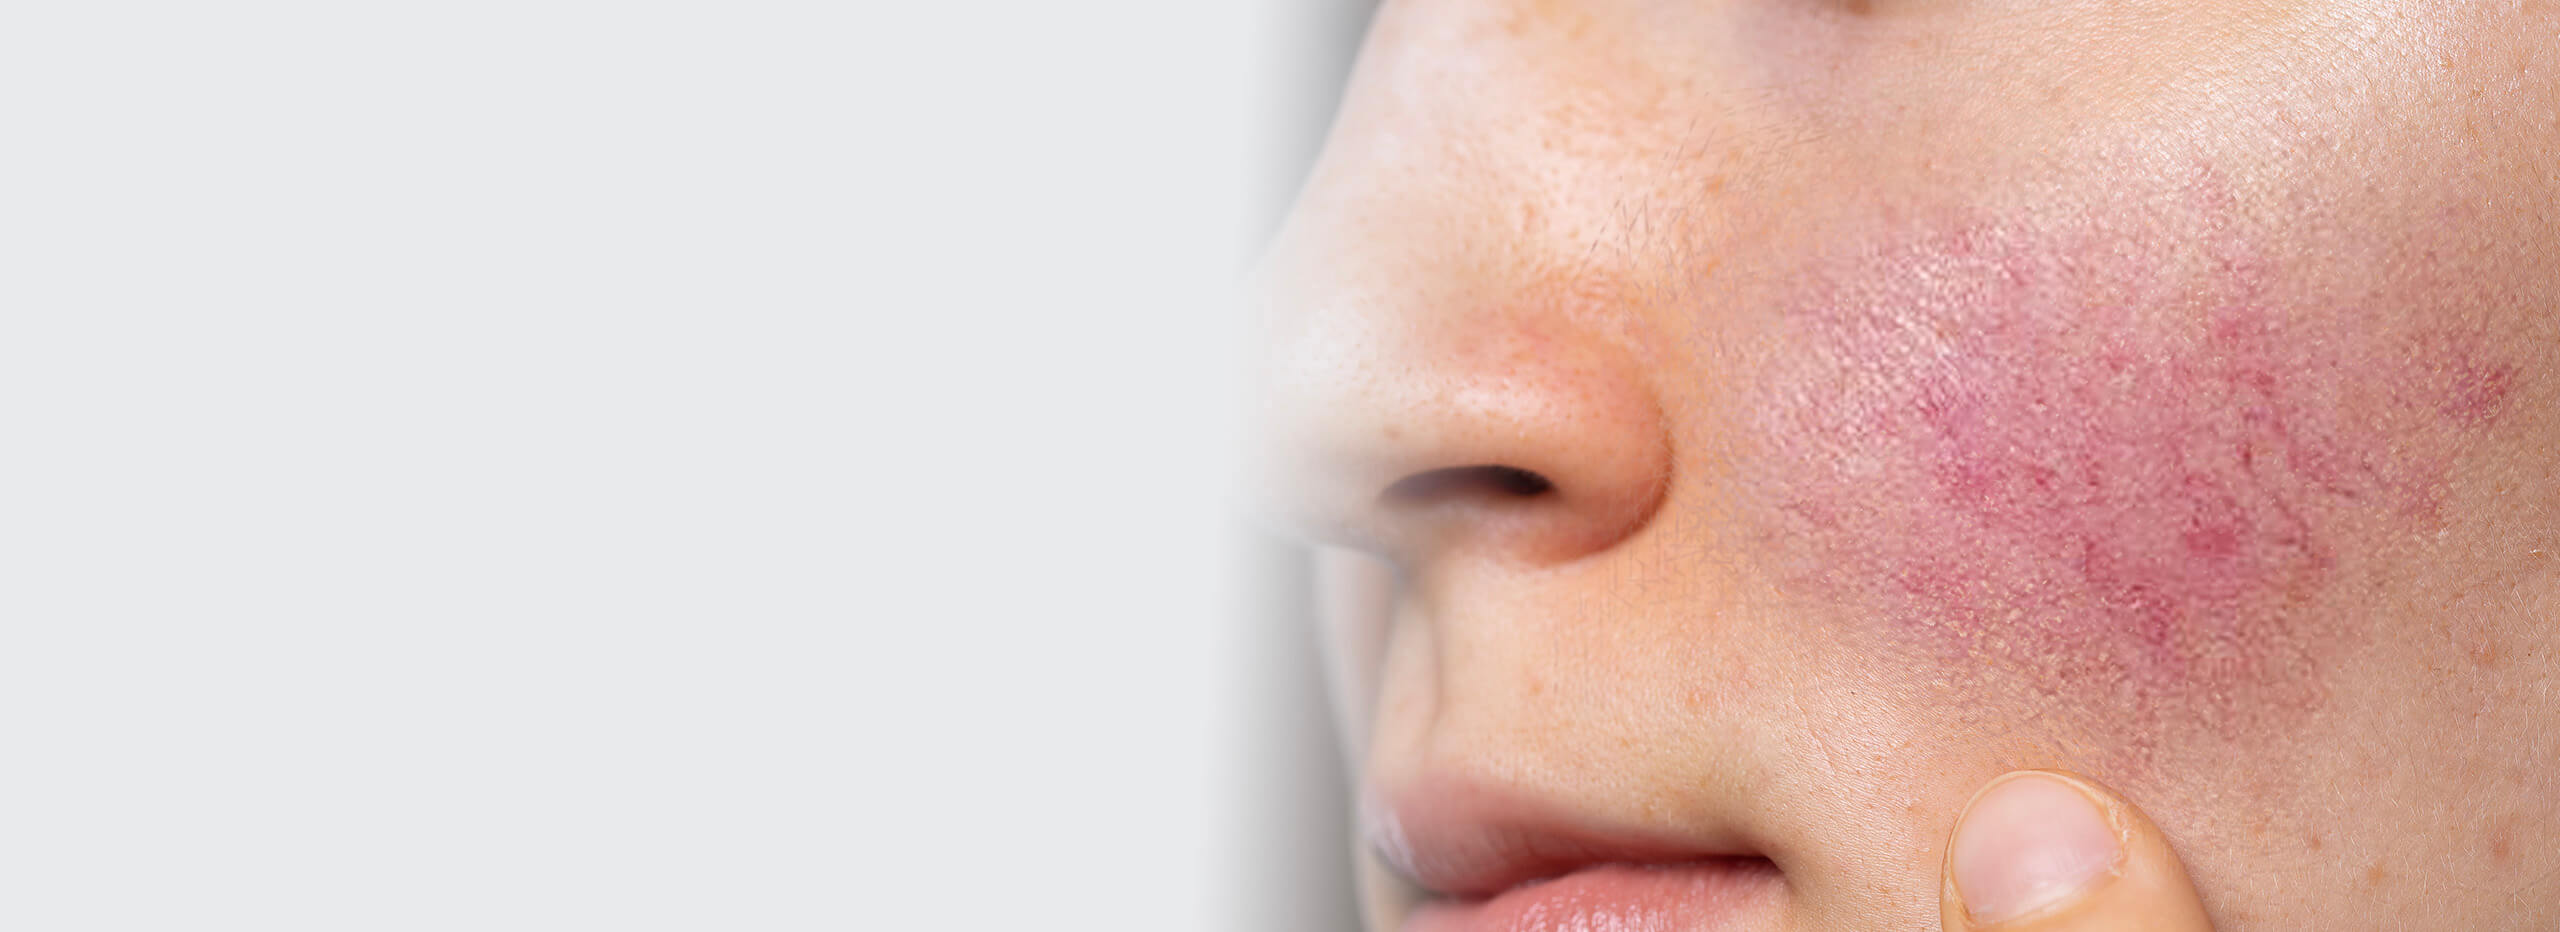 Rosacea | Javivo Aesthetic Clinic in Manchester